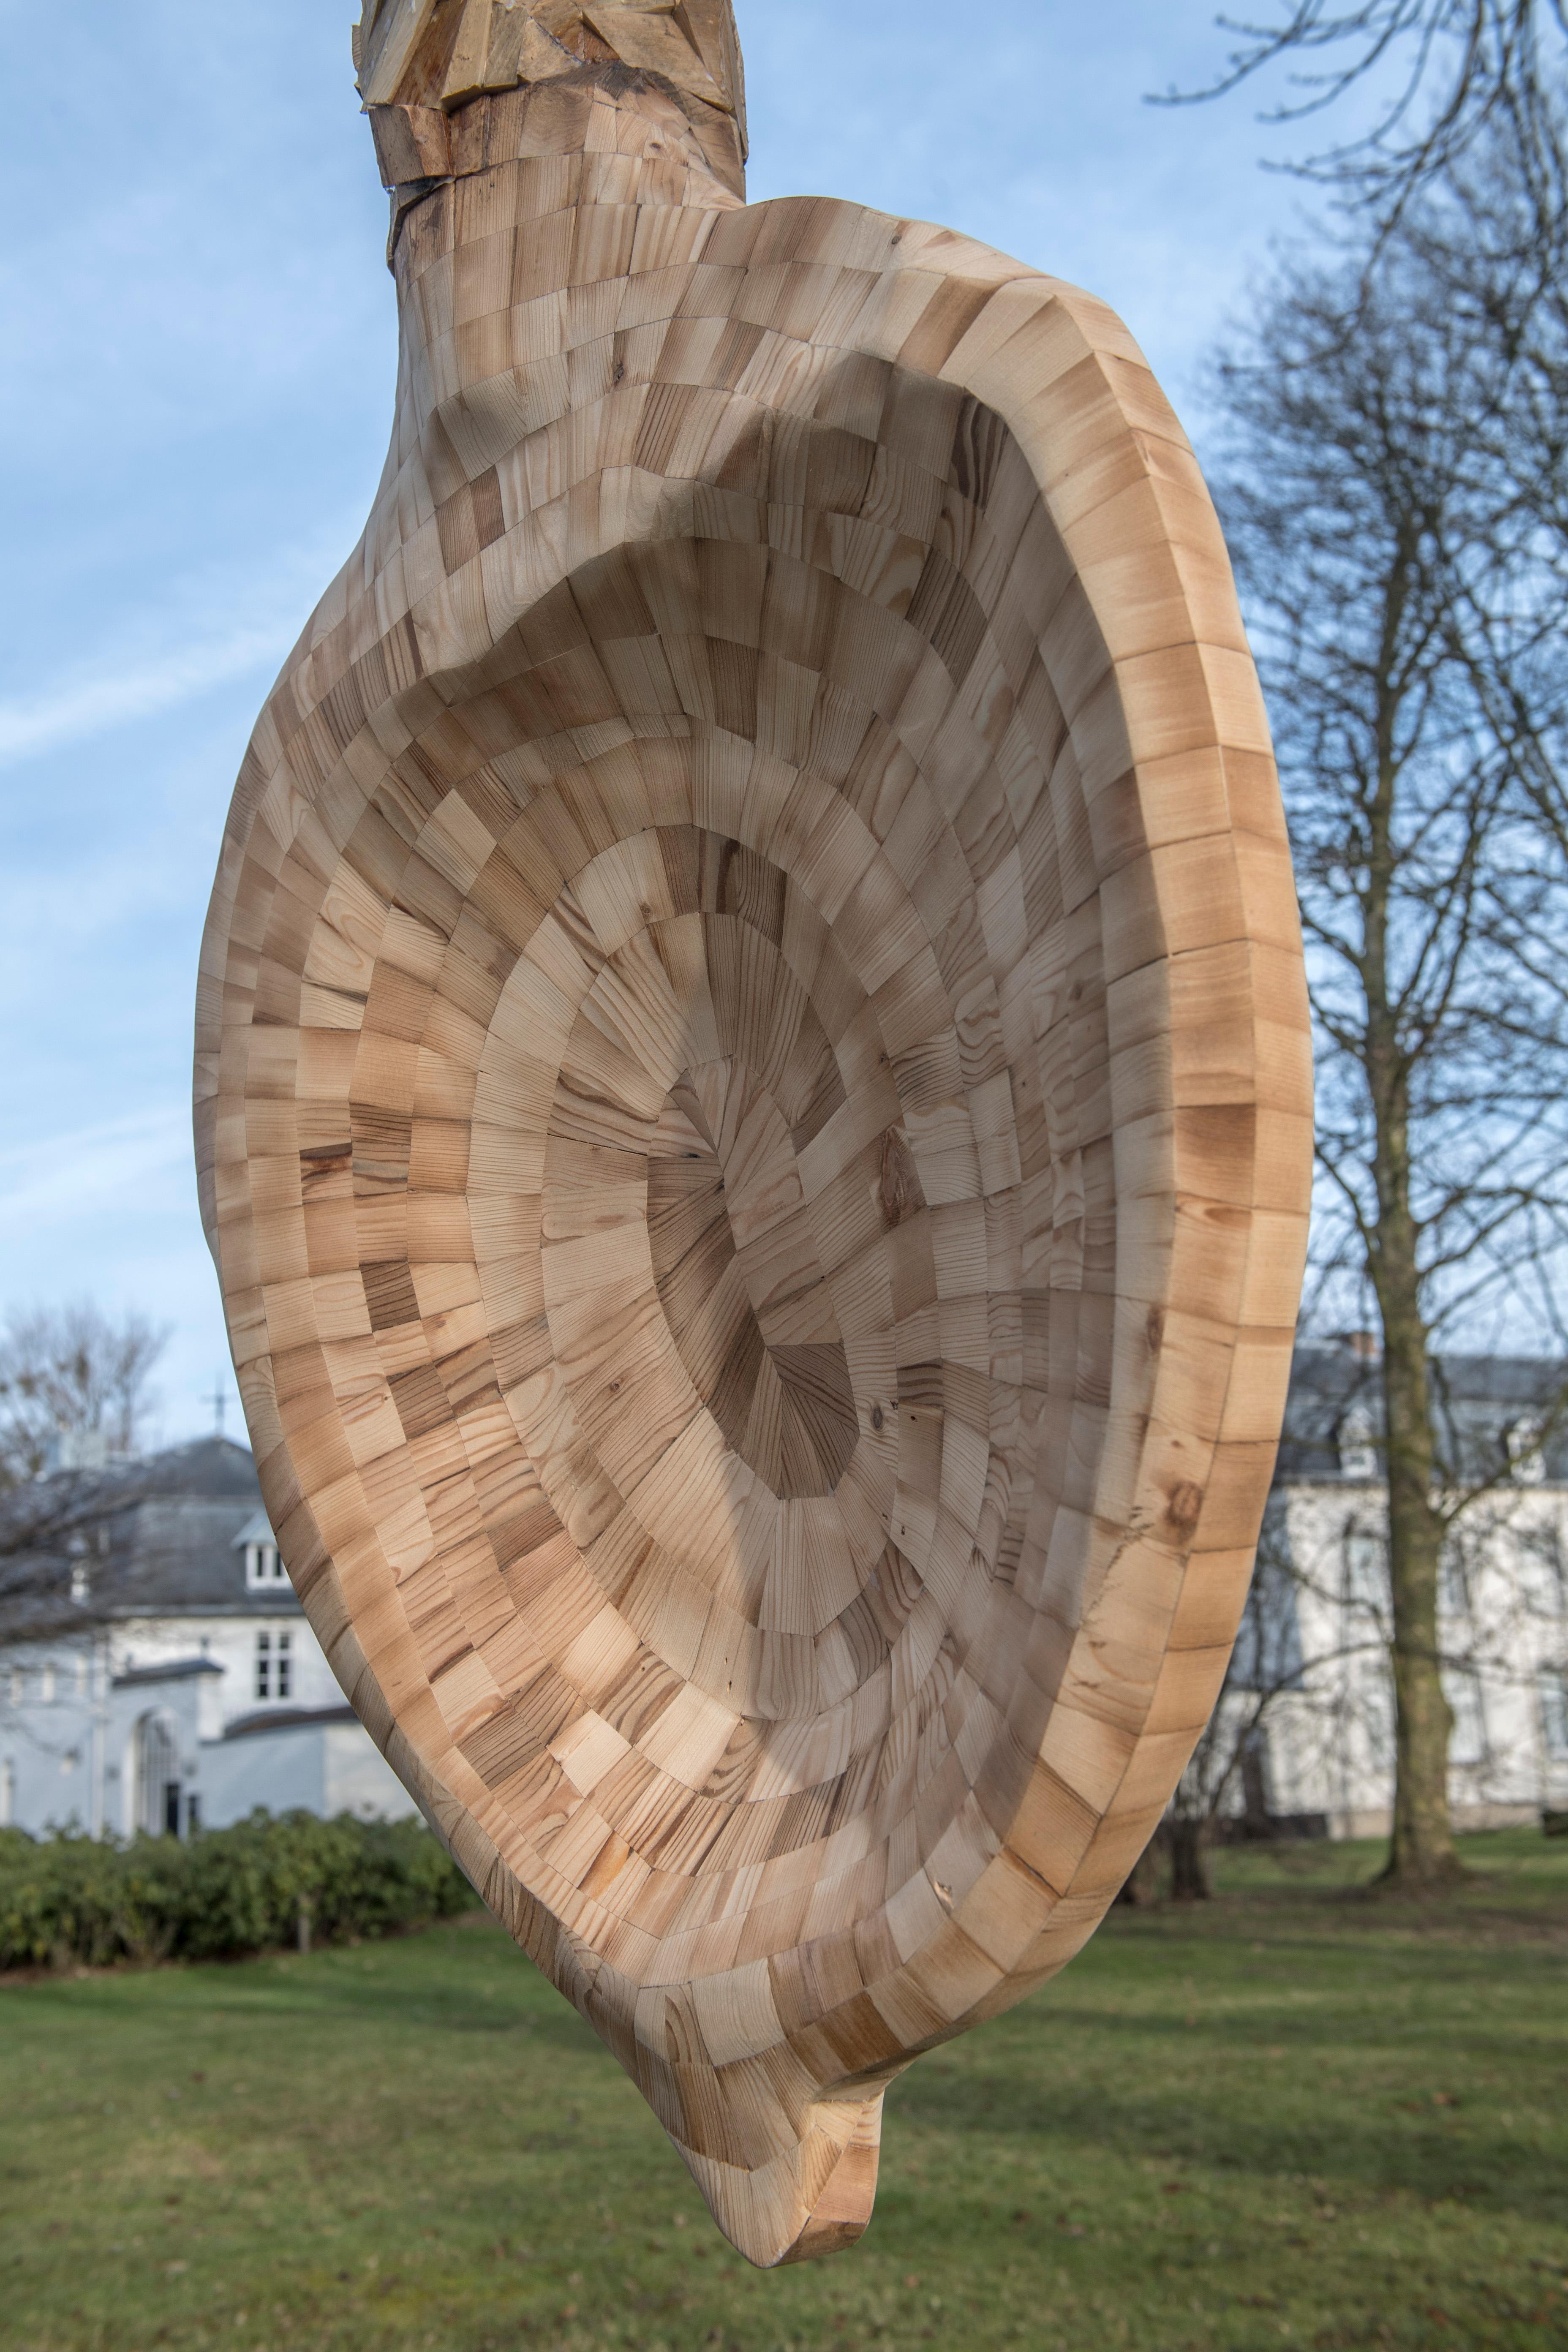 Alluding to a leaf, a raindrop, a seed, a willow or a mother with a child, the piece titled La Renaissance by Max Jungblut represents both a culmination of the working process and philosophy of the artist, as well as a radical departure and a new